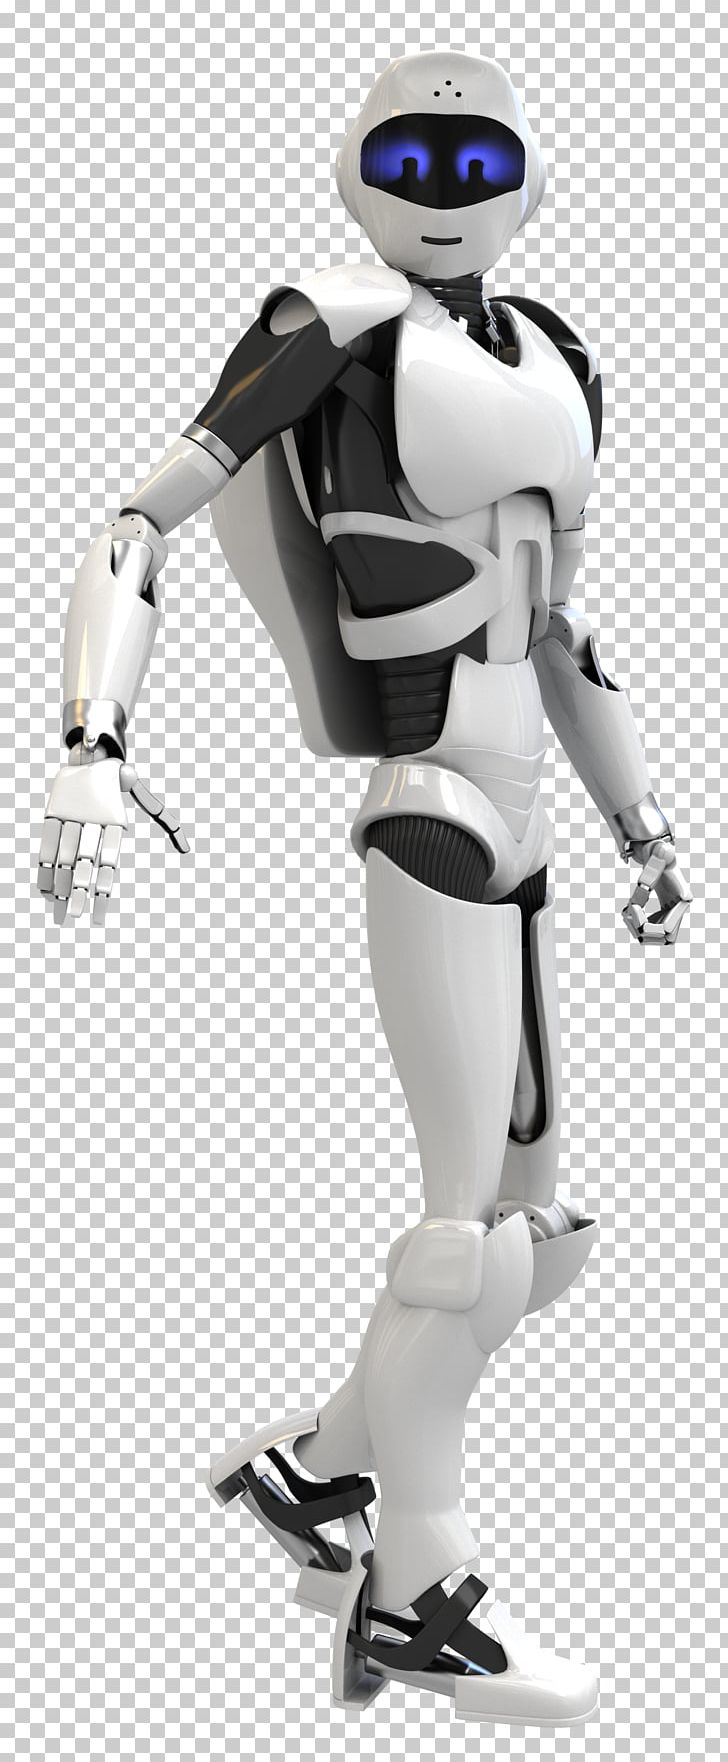 Robotics Humanoid Robot Personal Robot Alpha Smart Systems PNG, Clipart, Action Figure, Alpha Smart Systems, Android, Fantasy, Figurine Free PNG Download